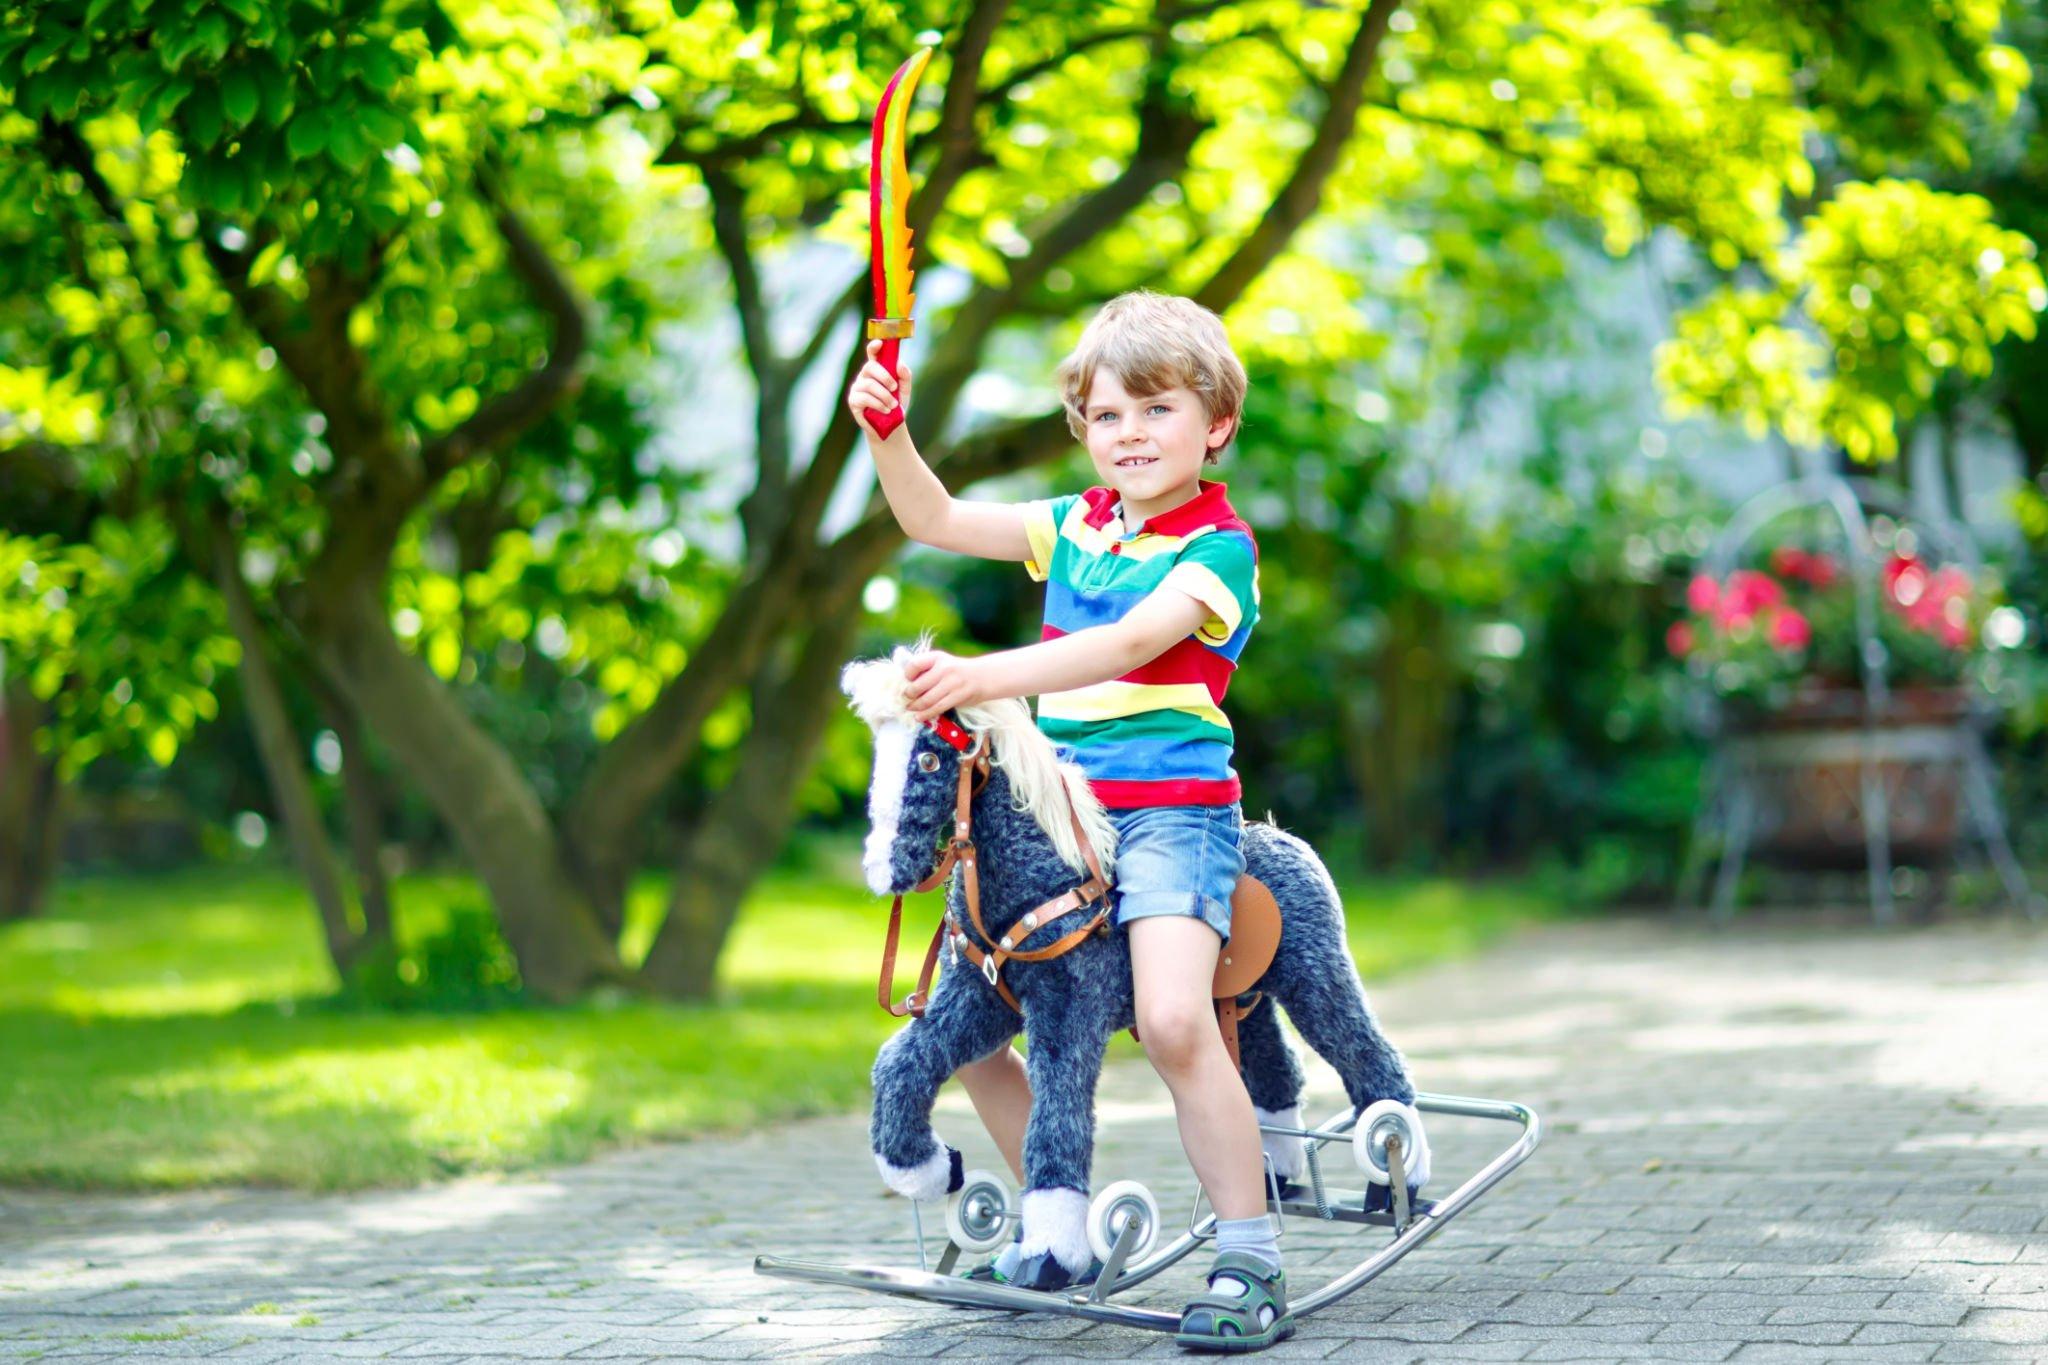 Sports and Riding Toys Are Great Physical Activities for Kids